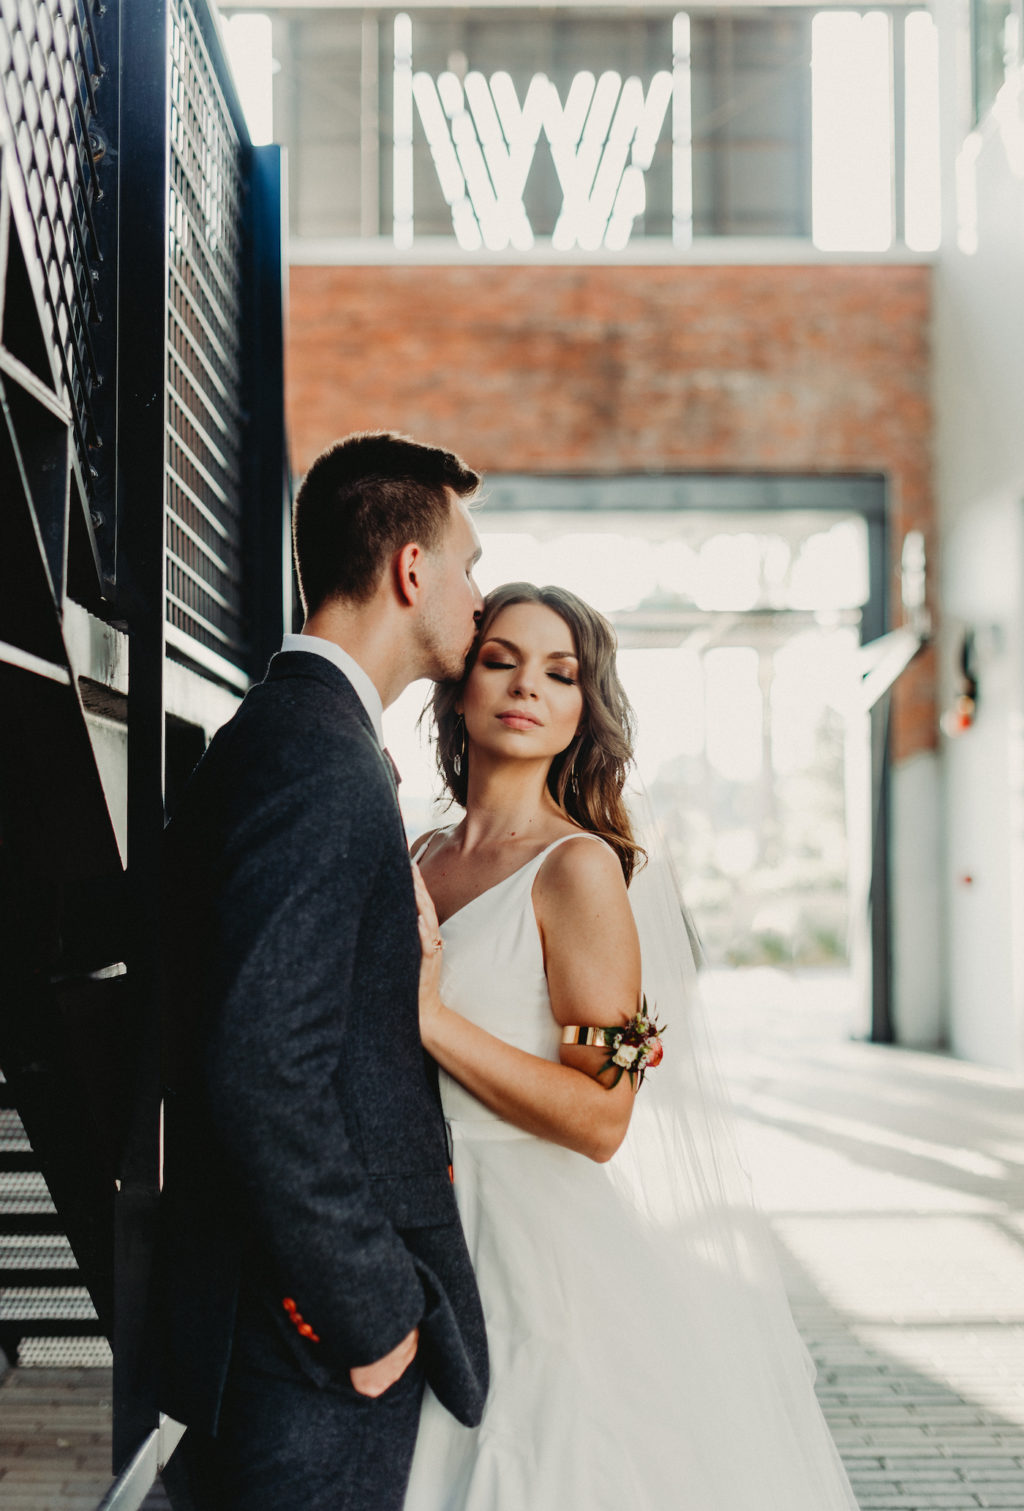 Bride and Groom Outdoor Wedding Portrait at Armature Works | Charcoal Grey Wool Groom Suit with Burgundy Maroon Red Neck Tie | Floral Bridal Arm Band | Dewitt for Love Photography